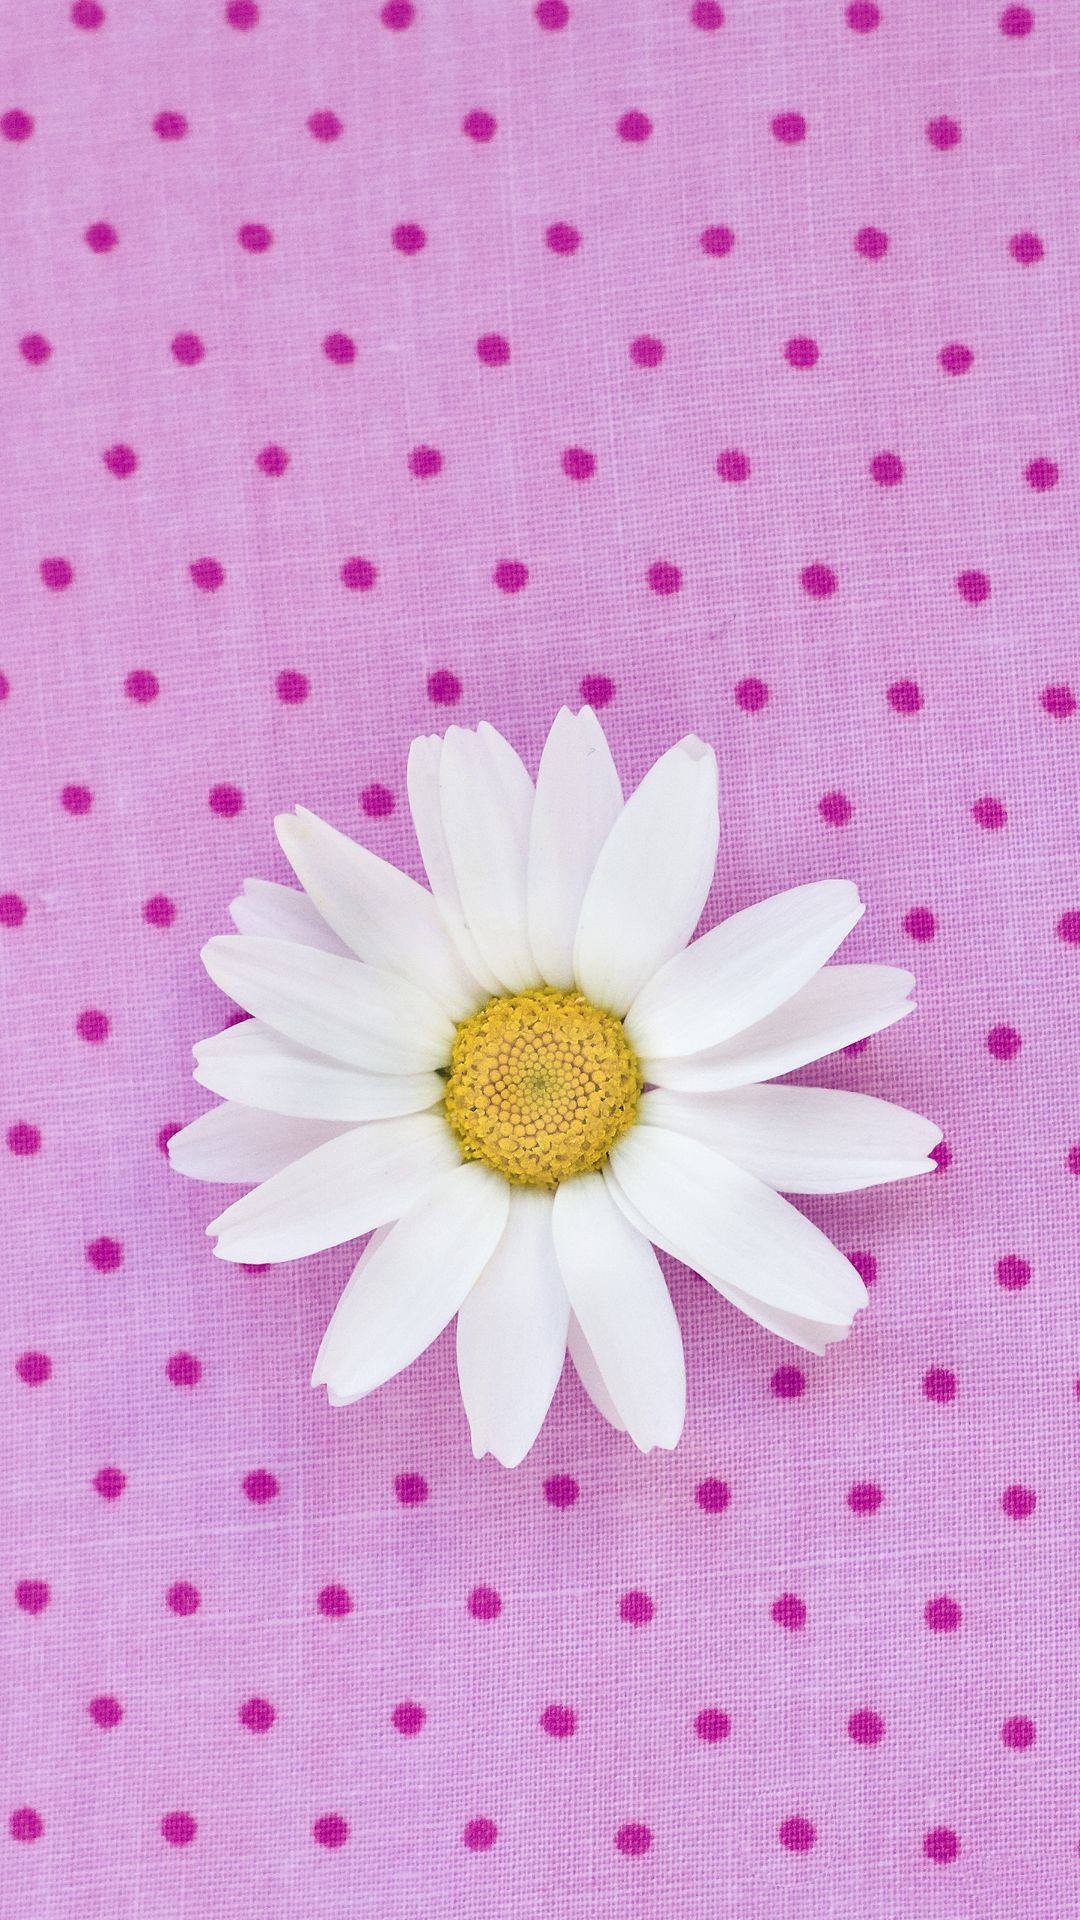 Cute White Daisy Iphone Background